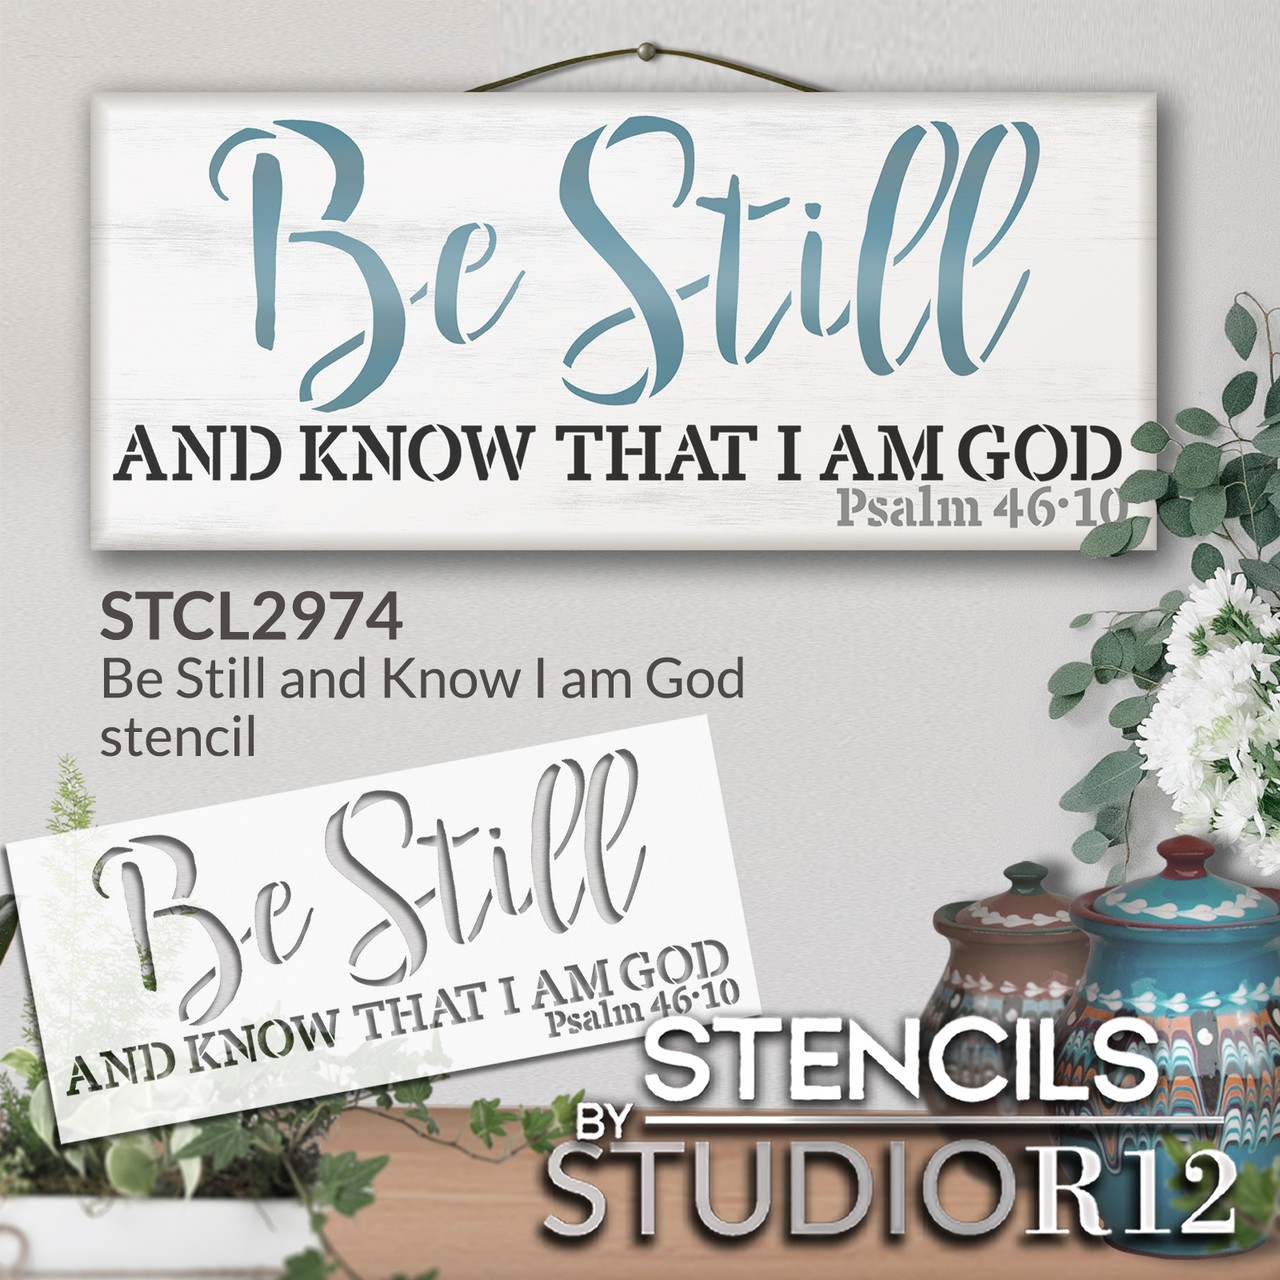 Be Still and Know I Am God Stencil by StudioR12 | Christian Bible Verse Psalm 46:10 | Farmhouse Faith Decor | Paint Wood Signs | Reusable Mylar Template | DIY Home Crafting | Select Size